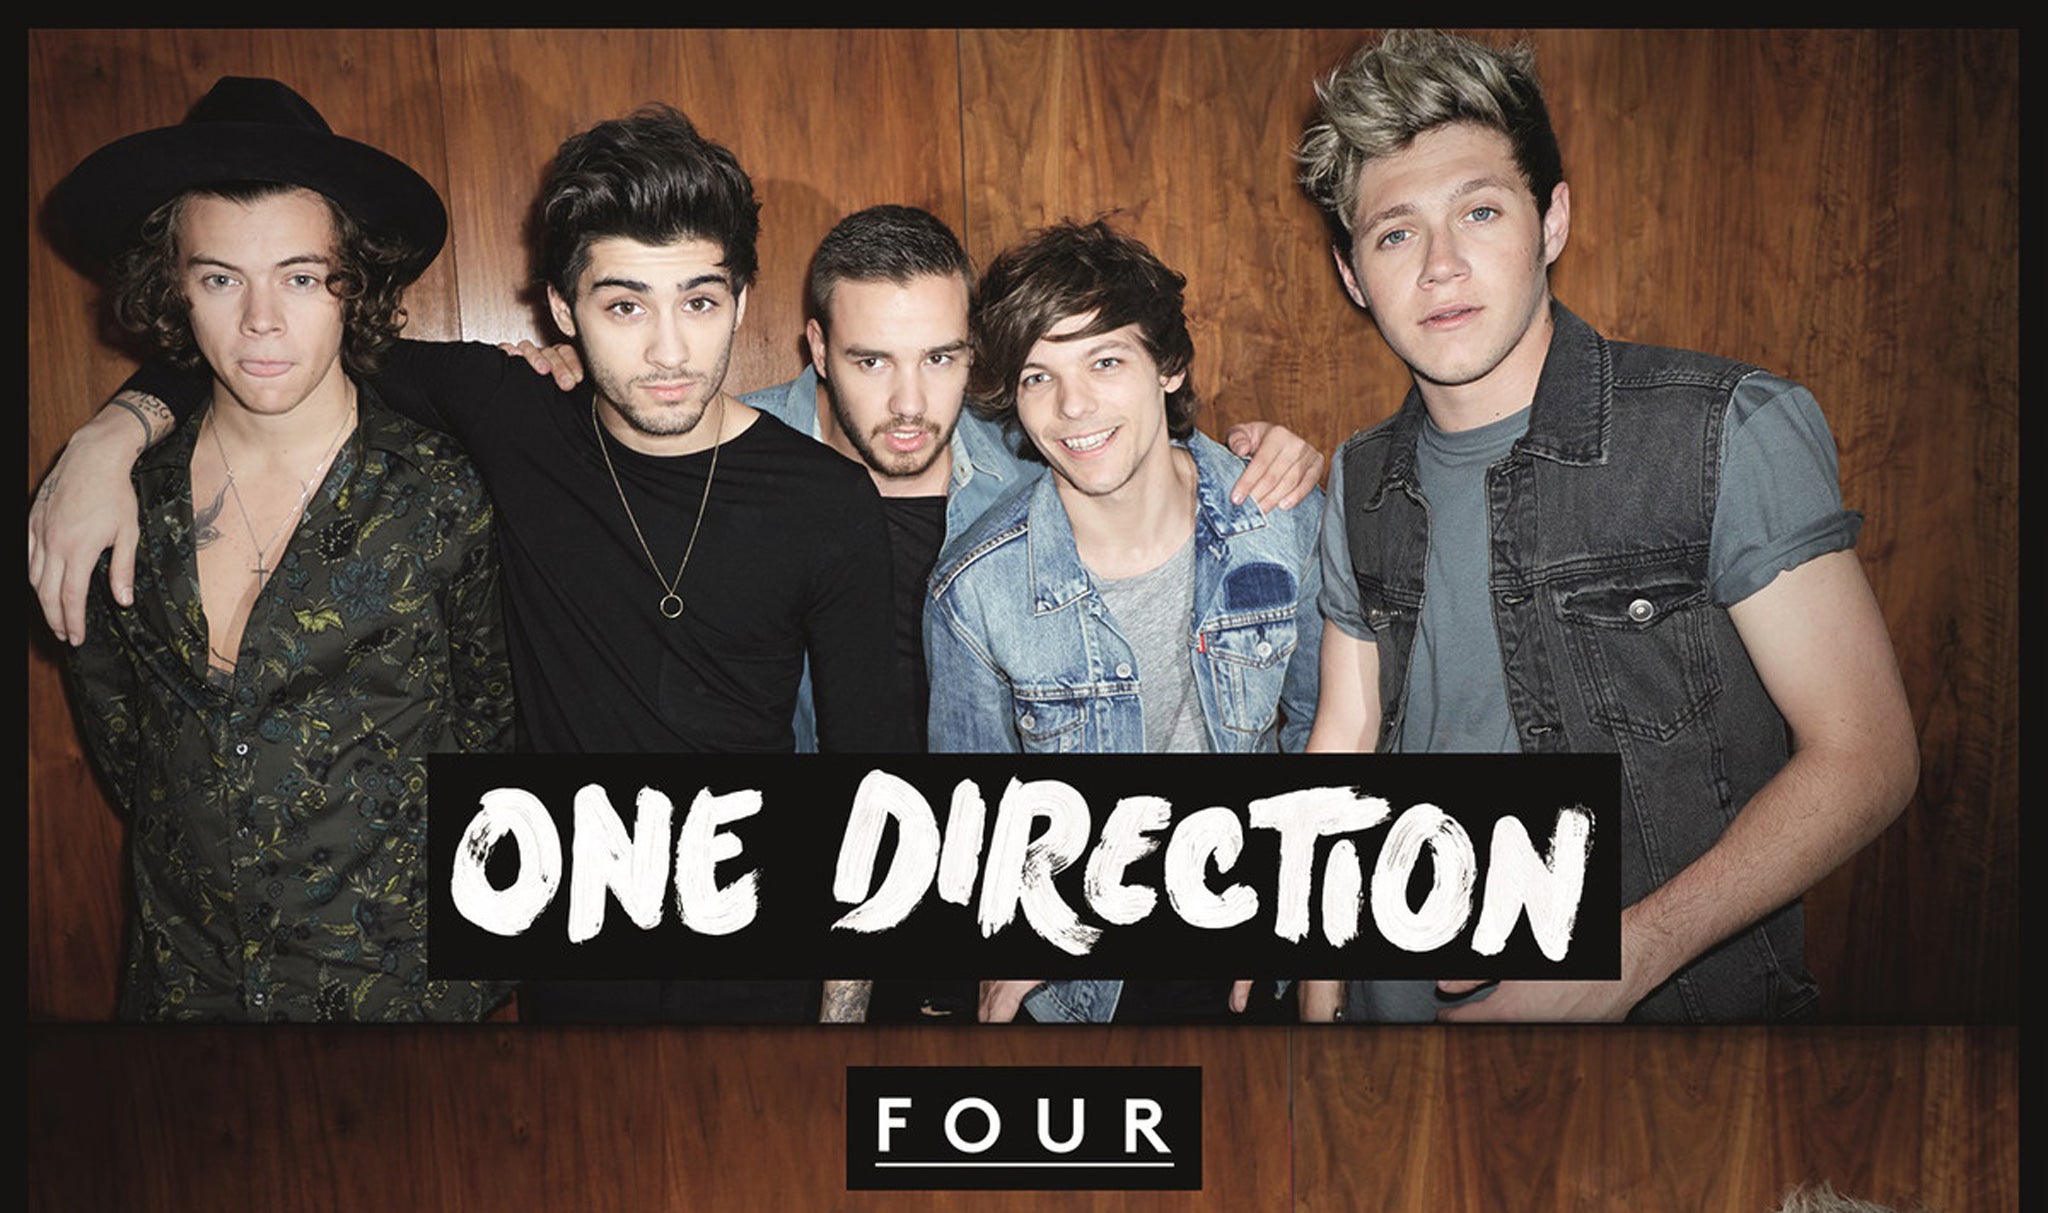 One Direction go Fourth: The boys pose on the cover of their new album Four